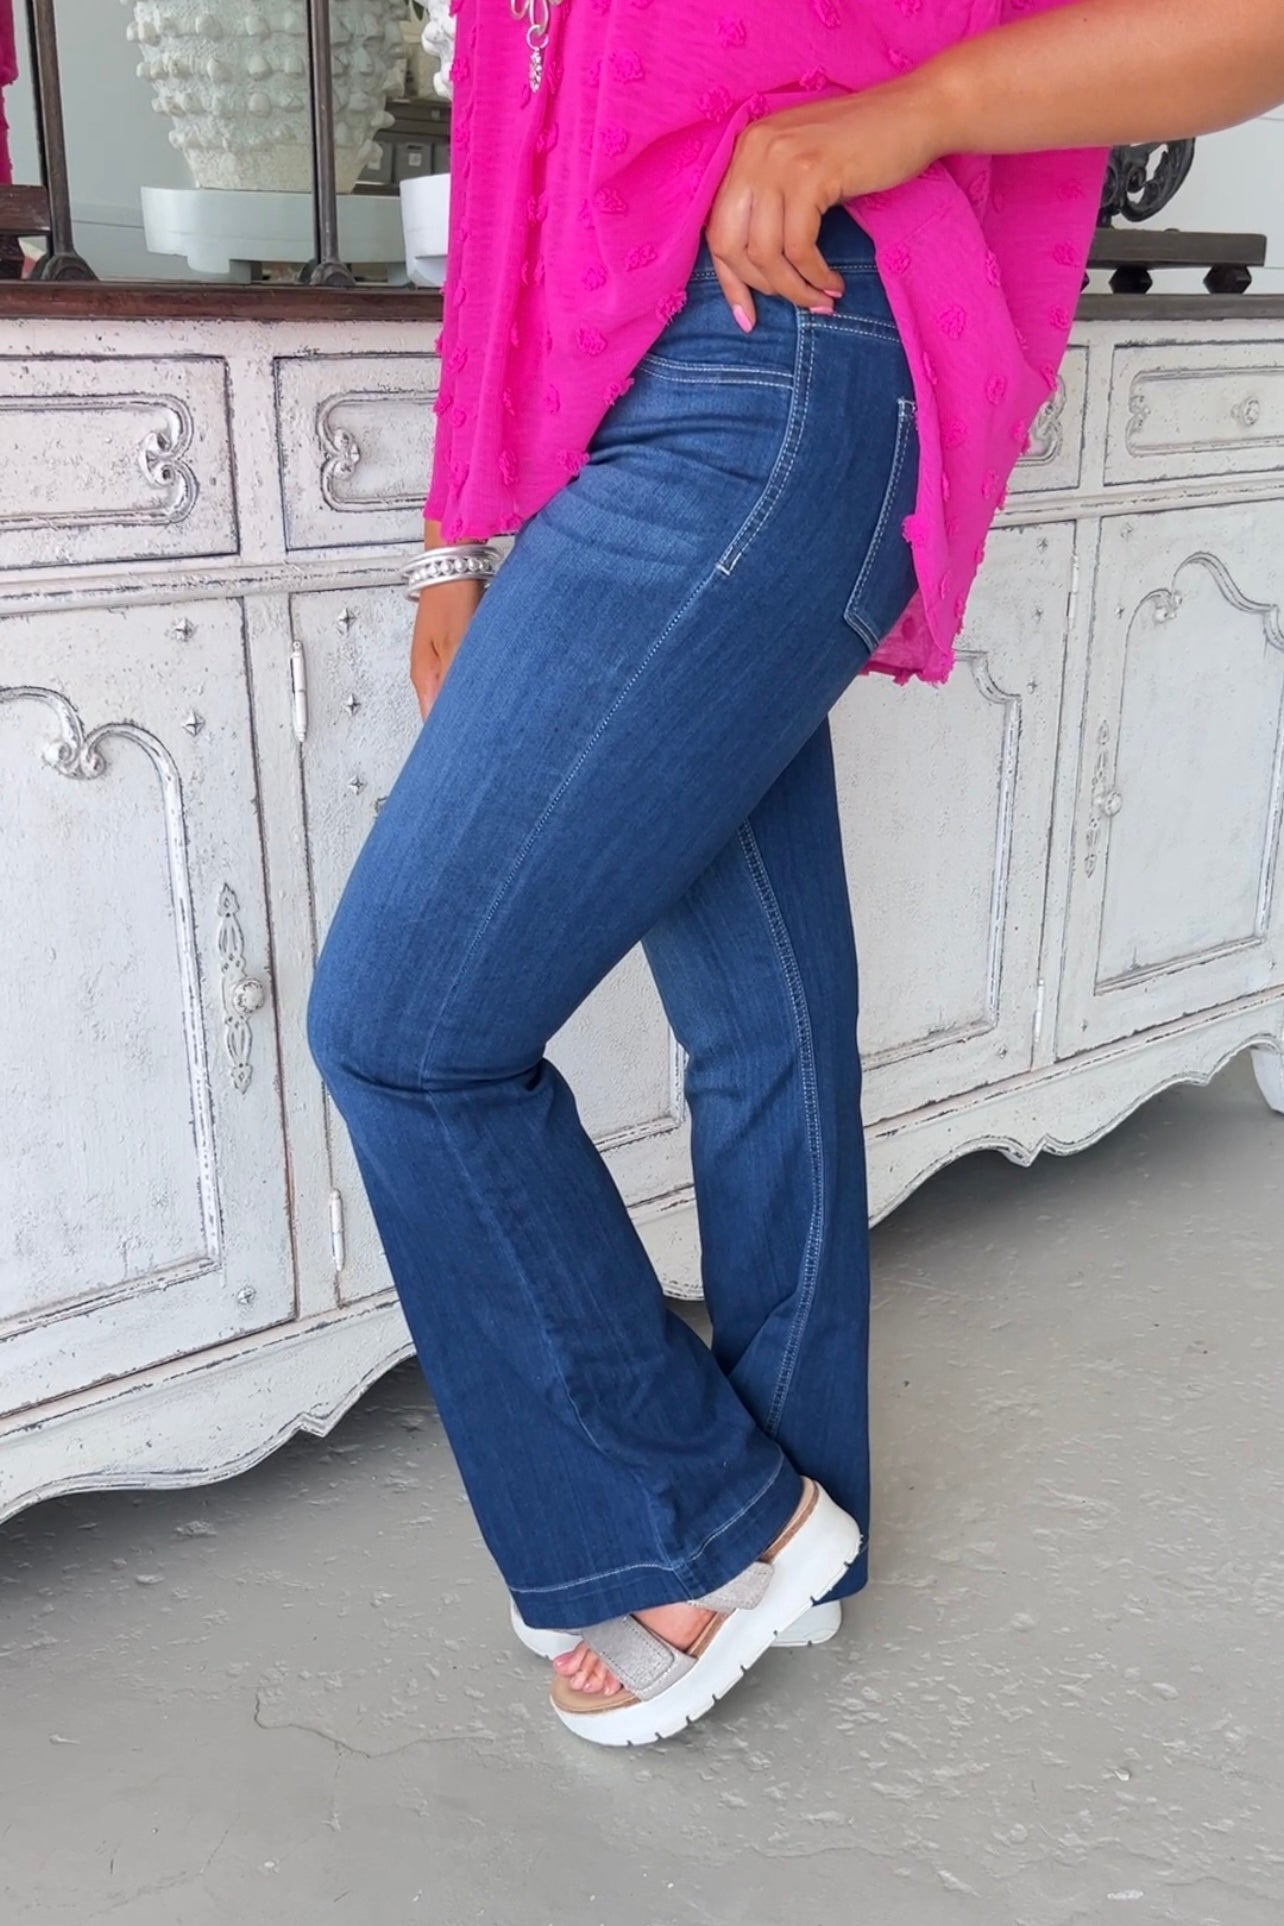 Hip Chick Jeans by Cello Pants Cello   